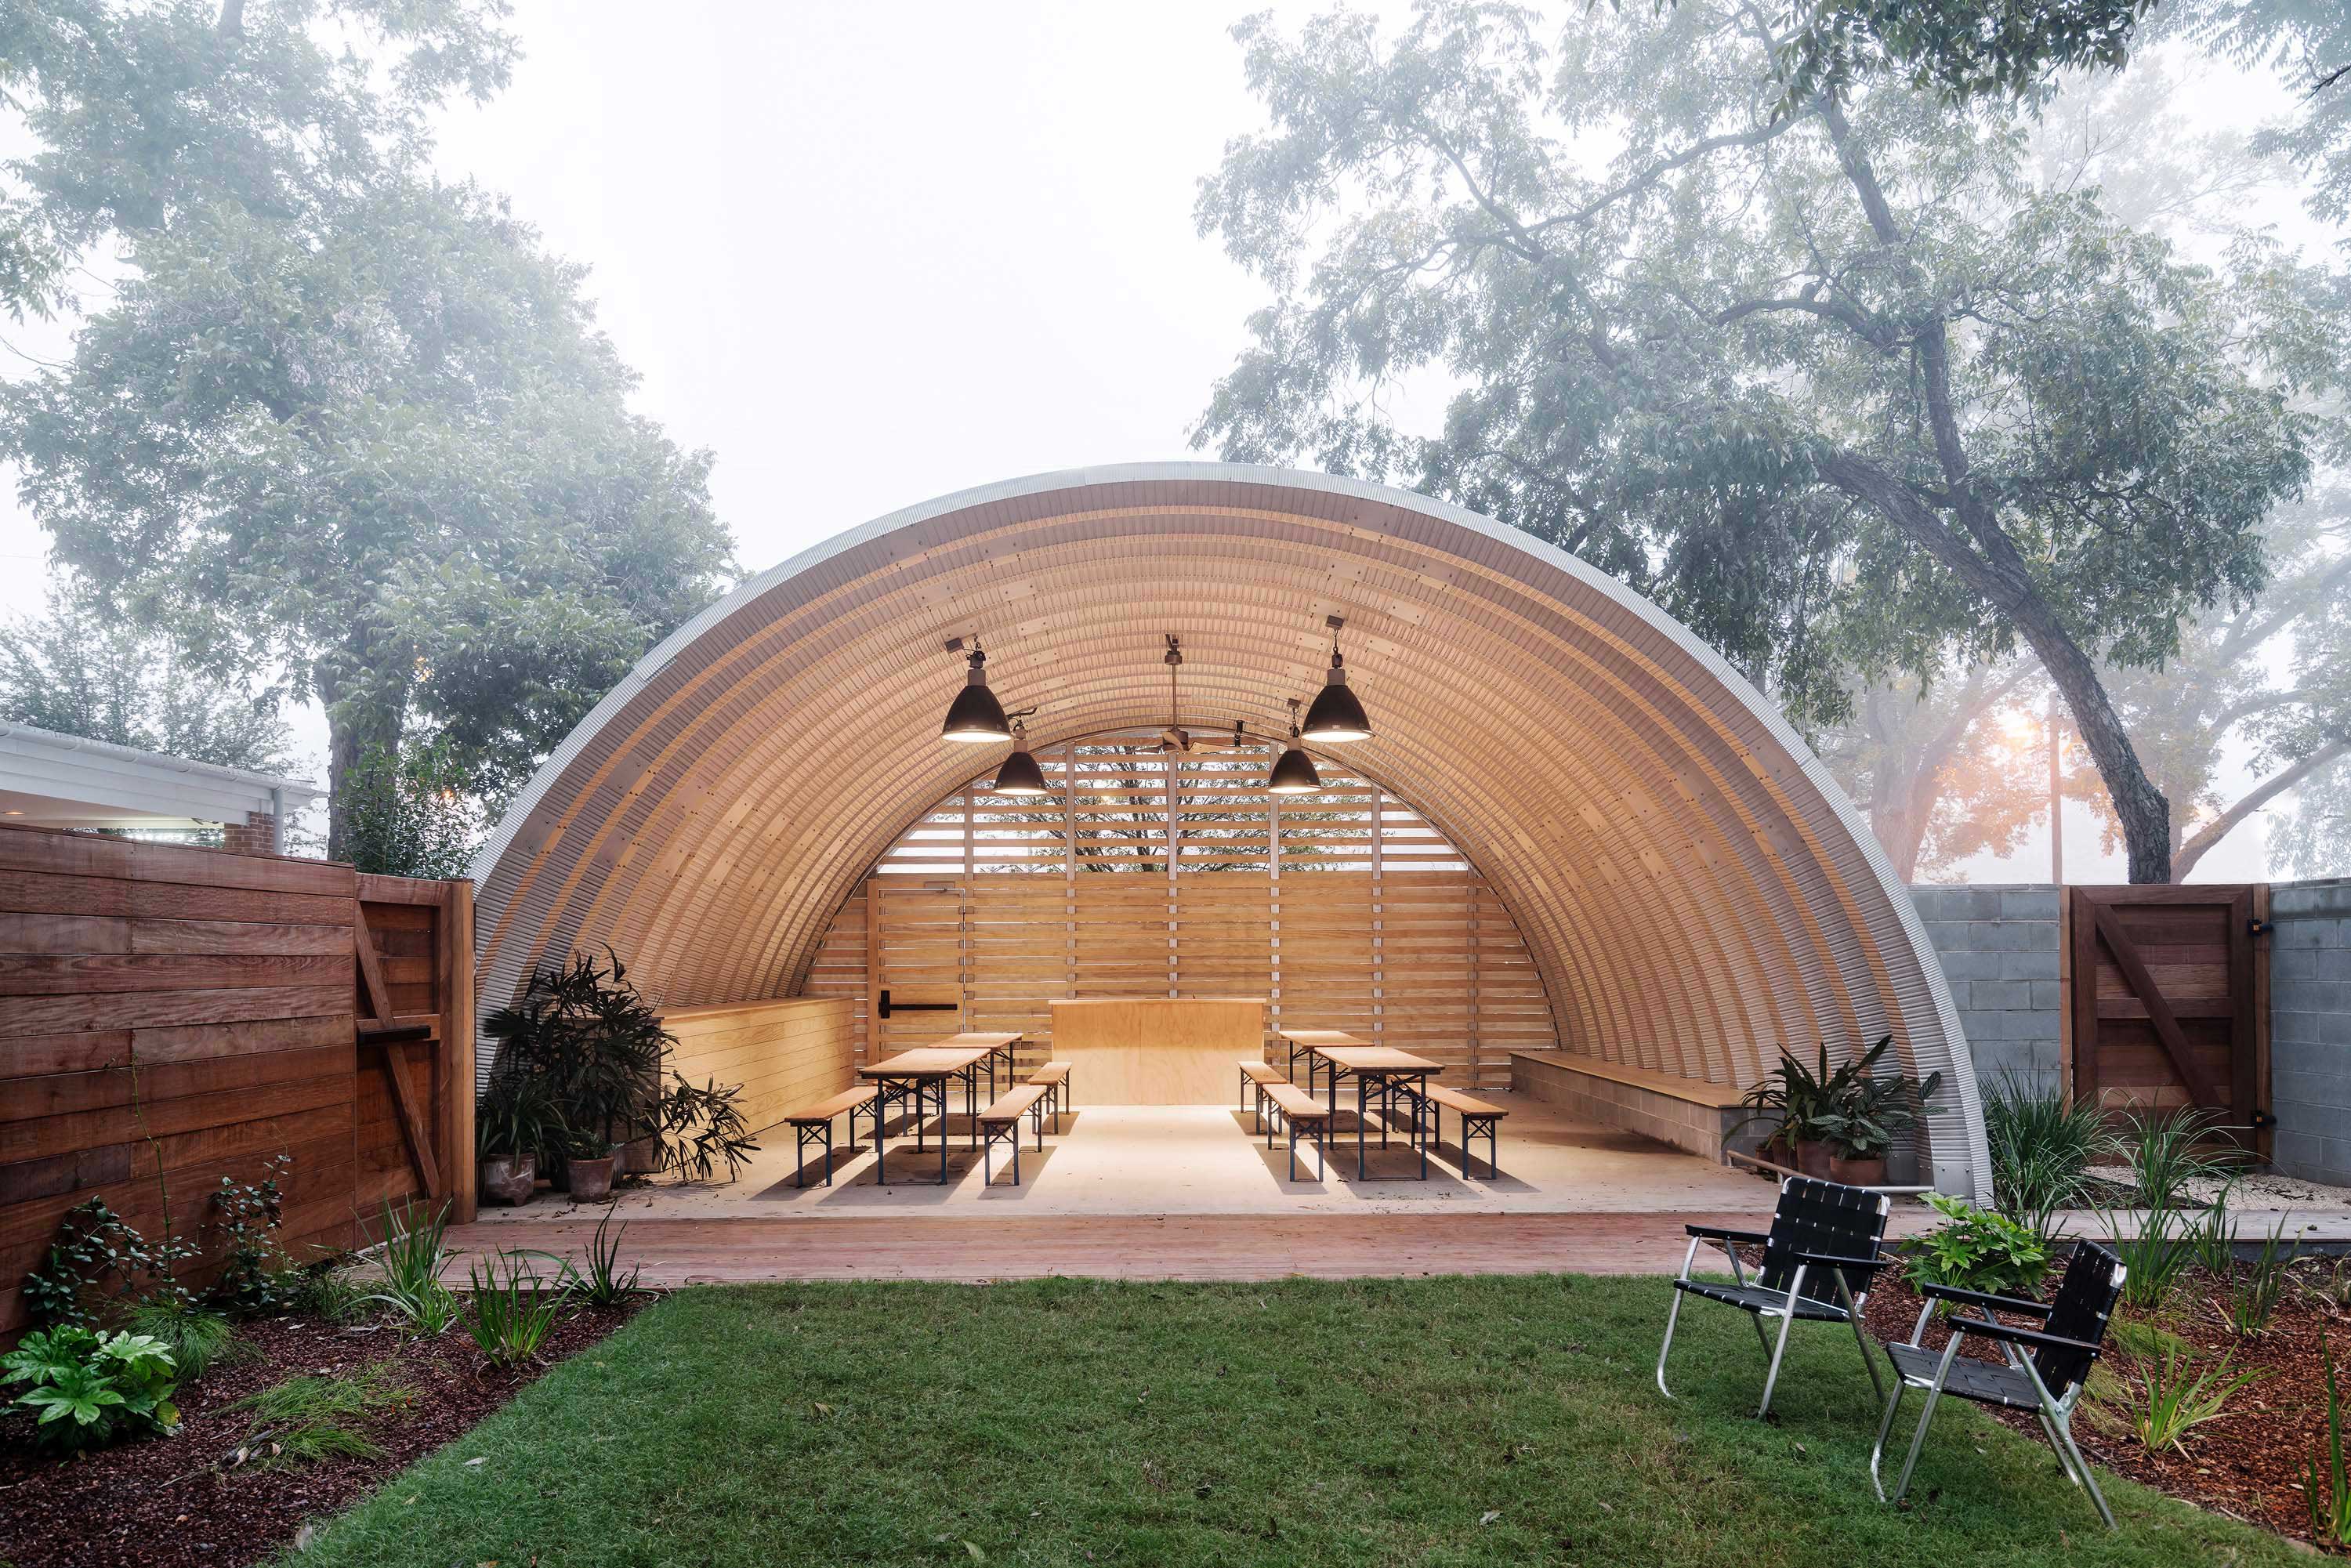 Interior photo of the Carpenter Hotel by Specht Novak Architects. Shot by Chase Daniel, featuring a barnlike arch structure over a communal sitting area adjacent to a yard, surrounded by trees.